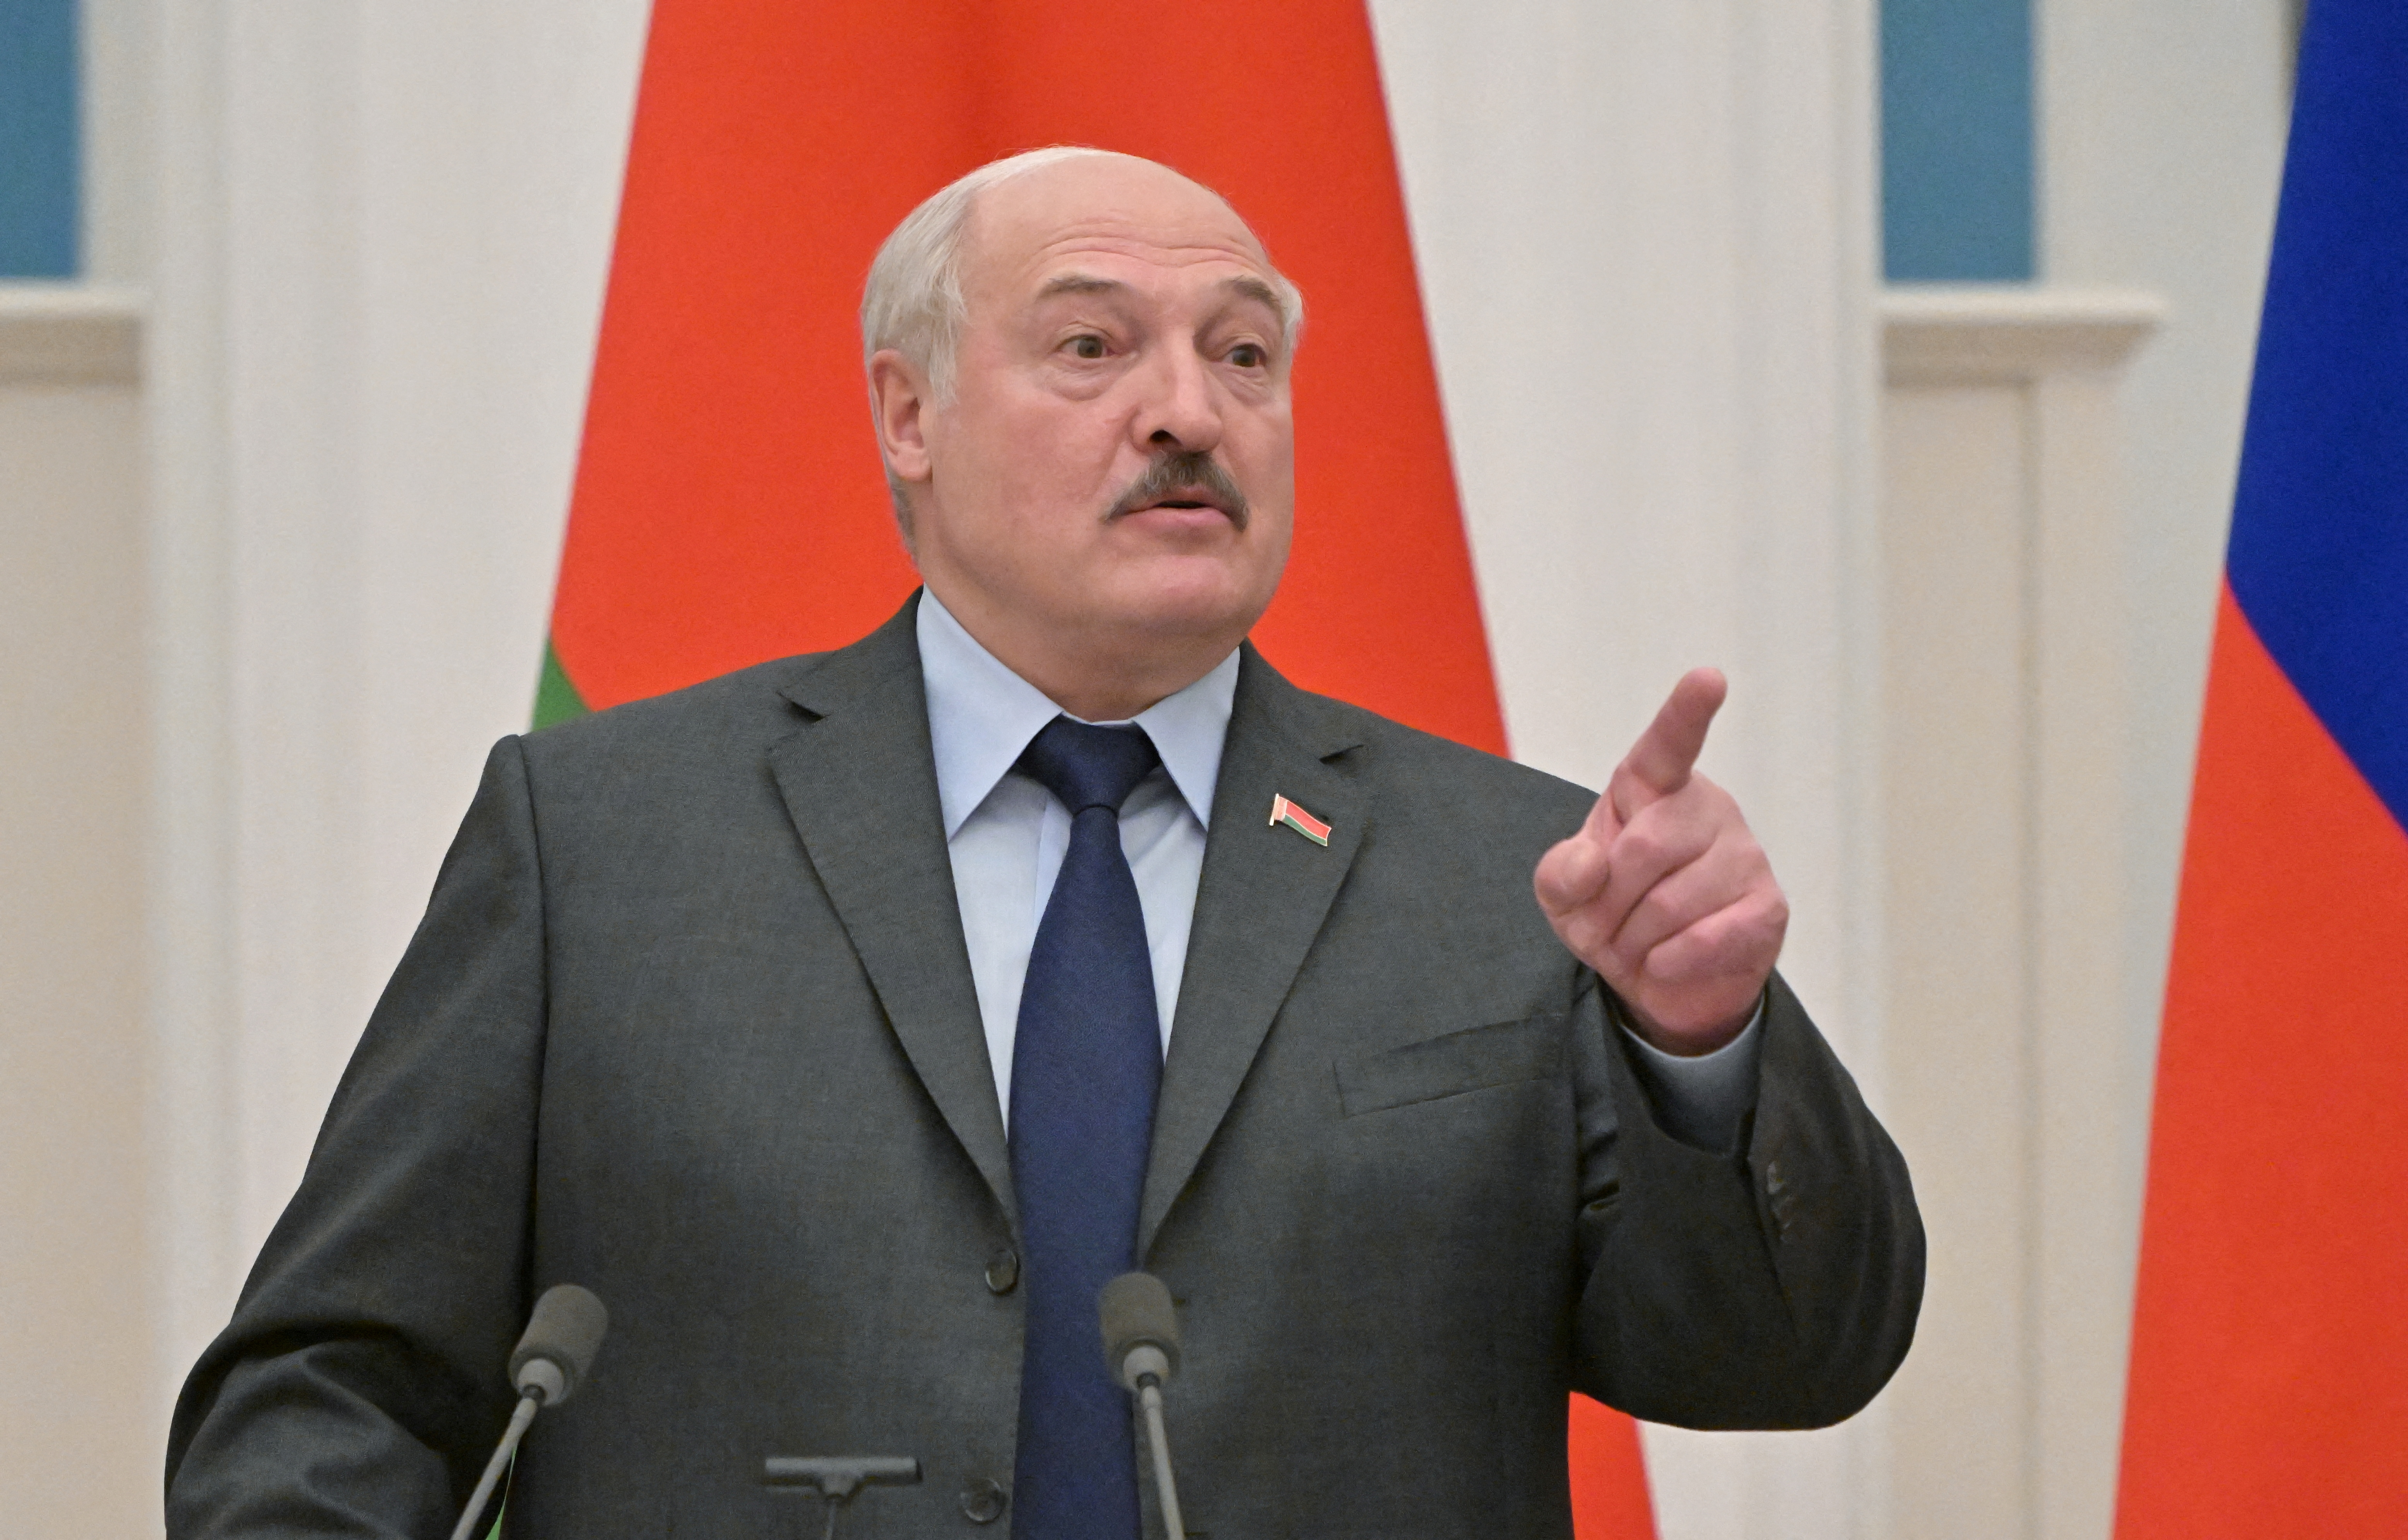 Belarusian President Alexander Lukashenko gestures during a joint news conference with Russian President Vladimir Putin in Moscow, Russia February 18, 2022